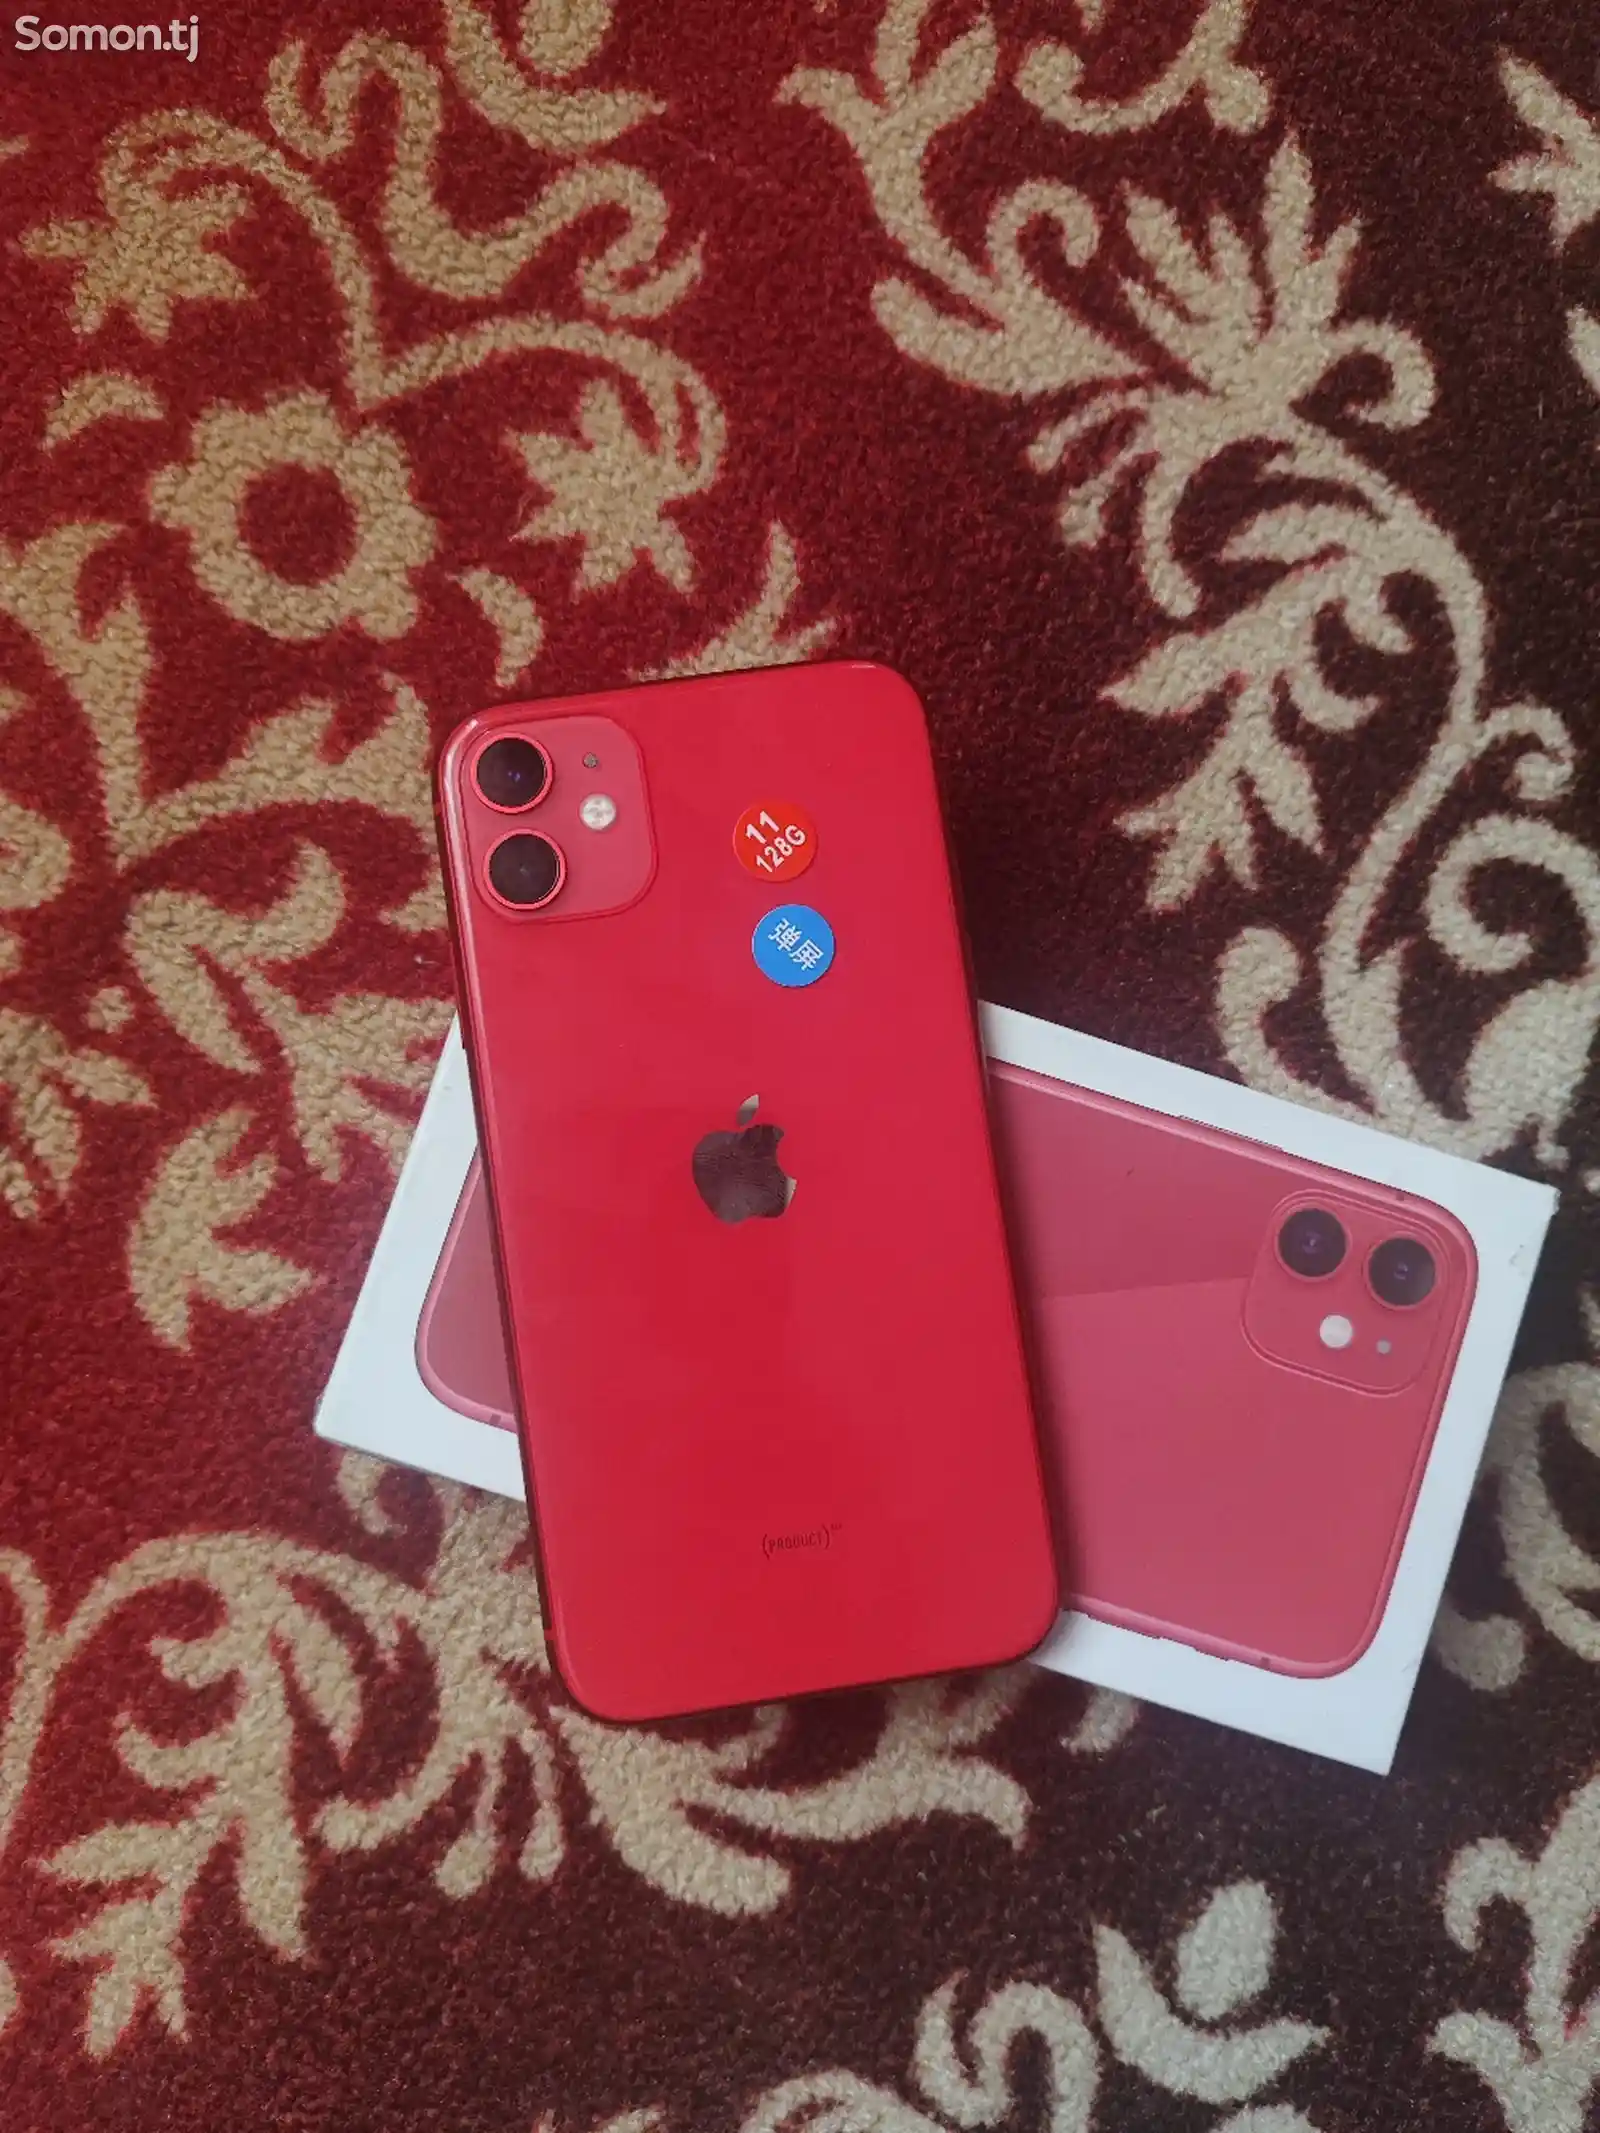 Apple iPhone 11, 128 gb, Product Red-1